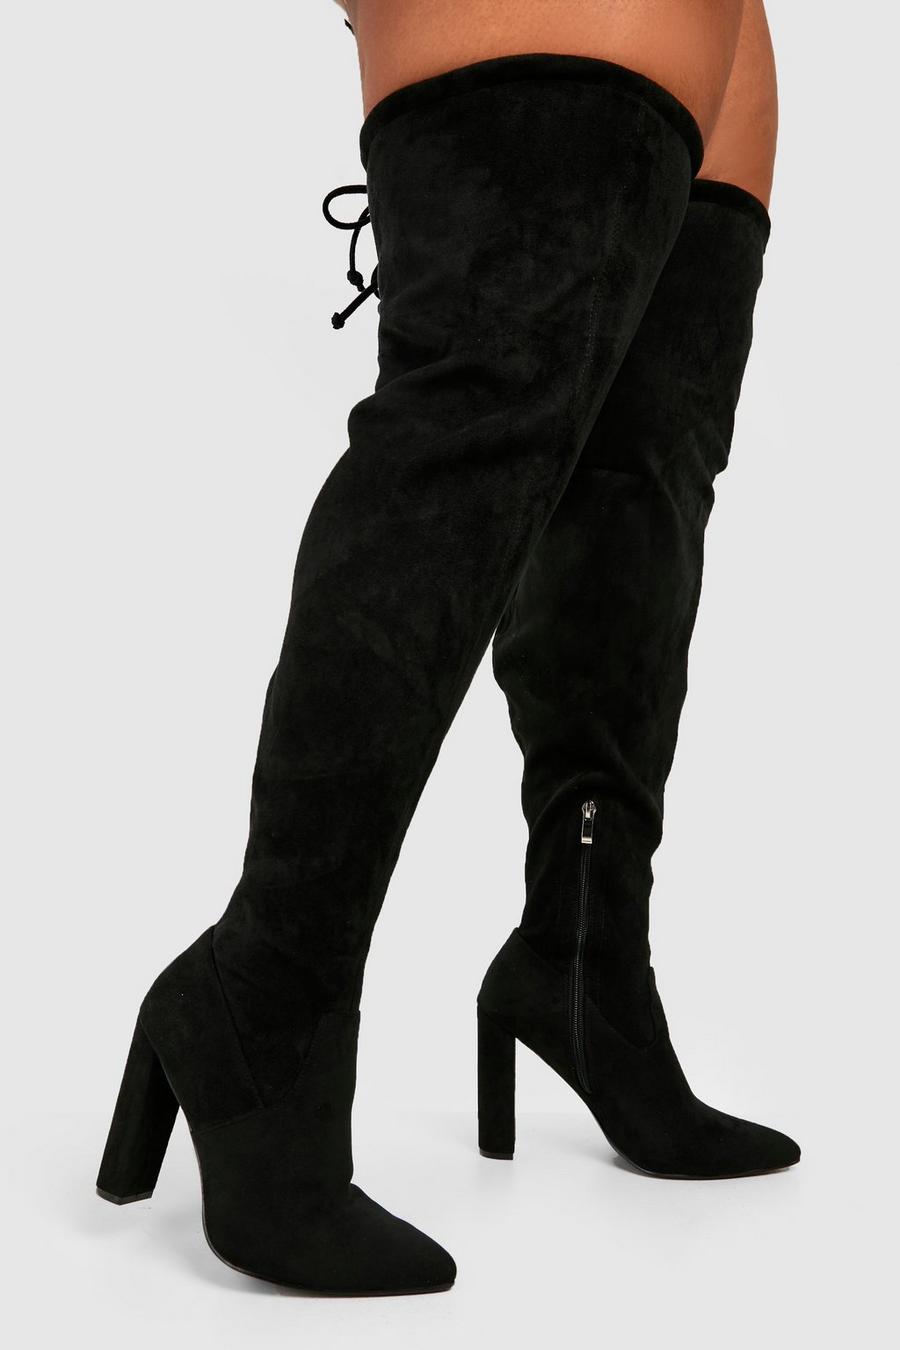 Black Wide Calf Tie Detail Heeled Over The Knee Boots